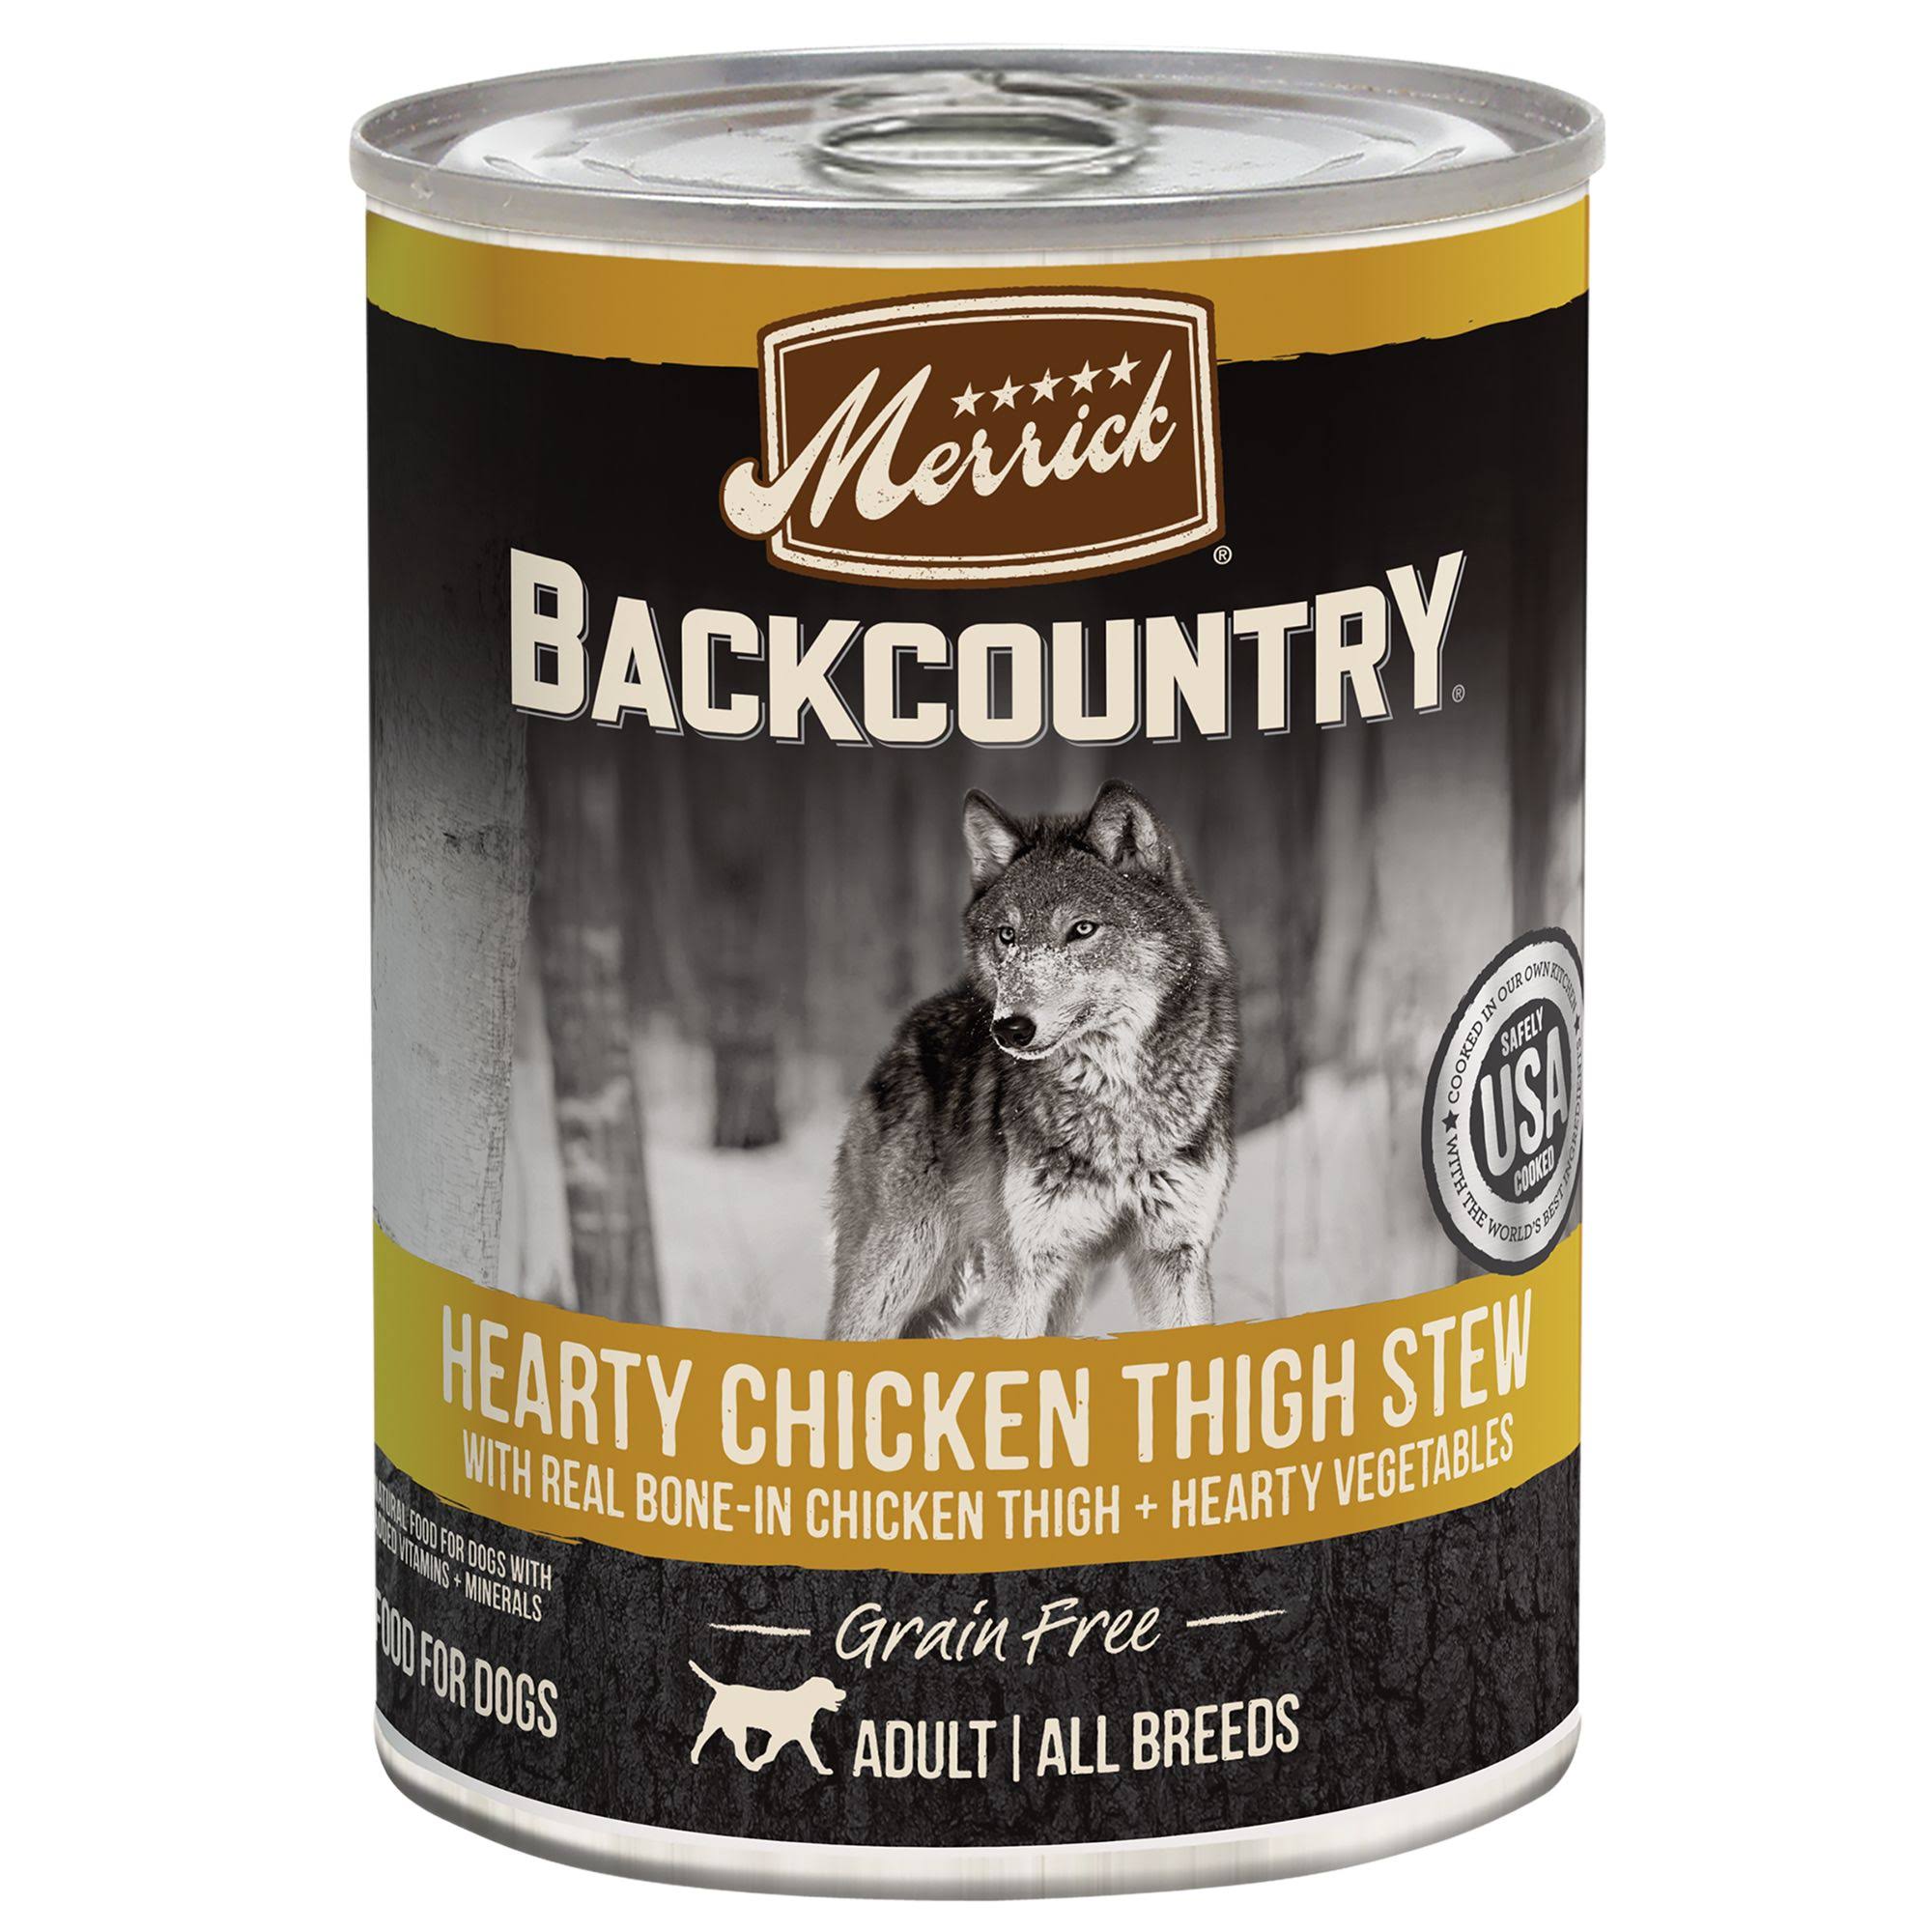 Merrick Backcountry Grain Canned Dog Food - Hearty Chicken Thigh Stew, 12.7oz